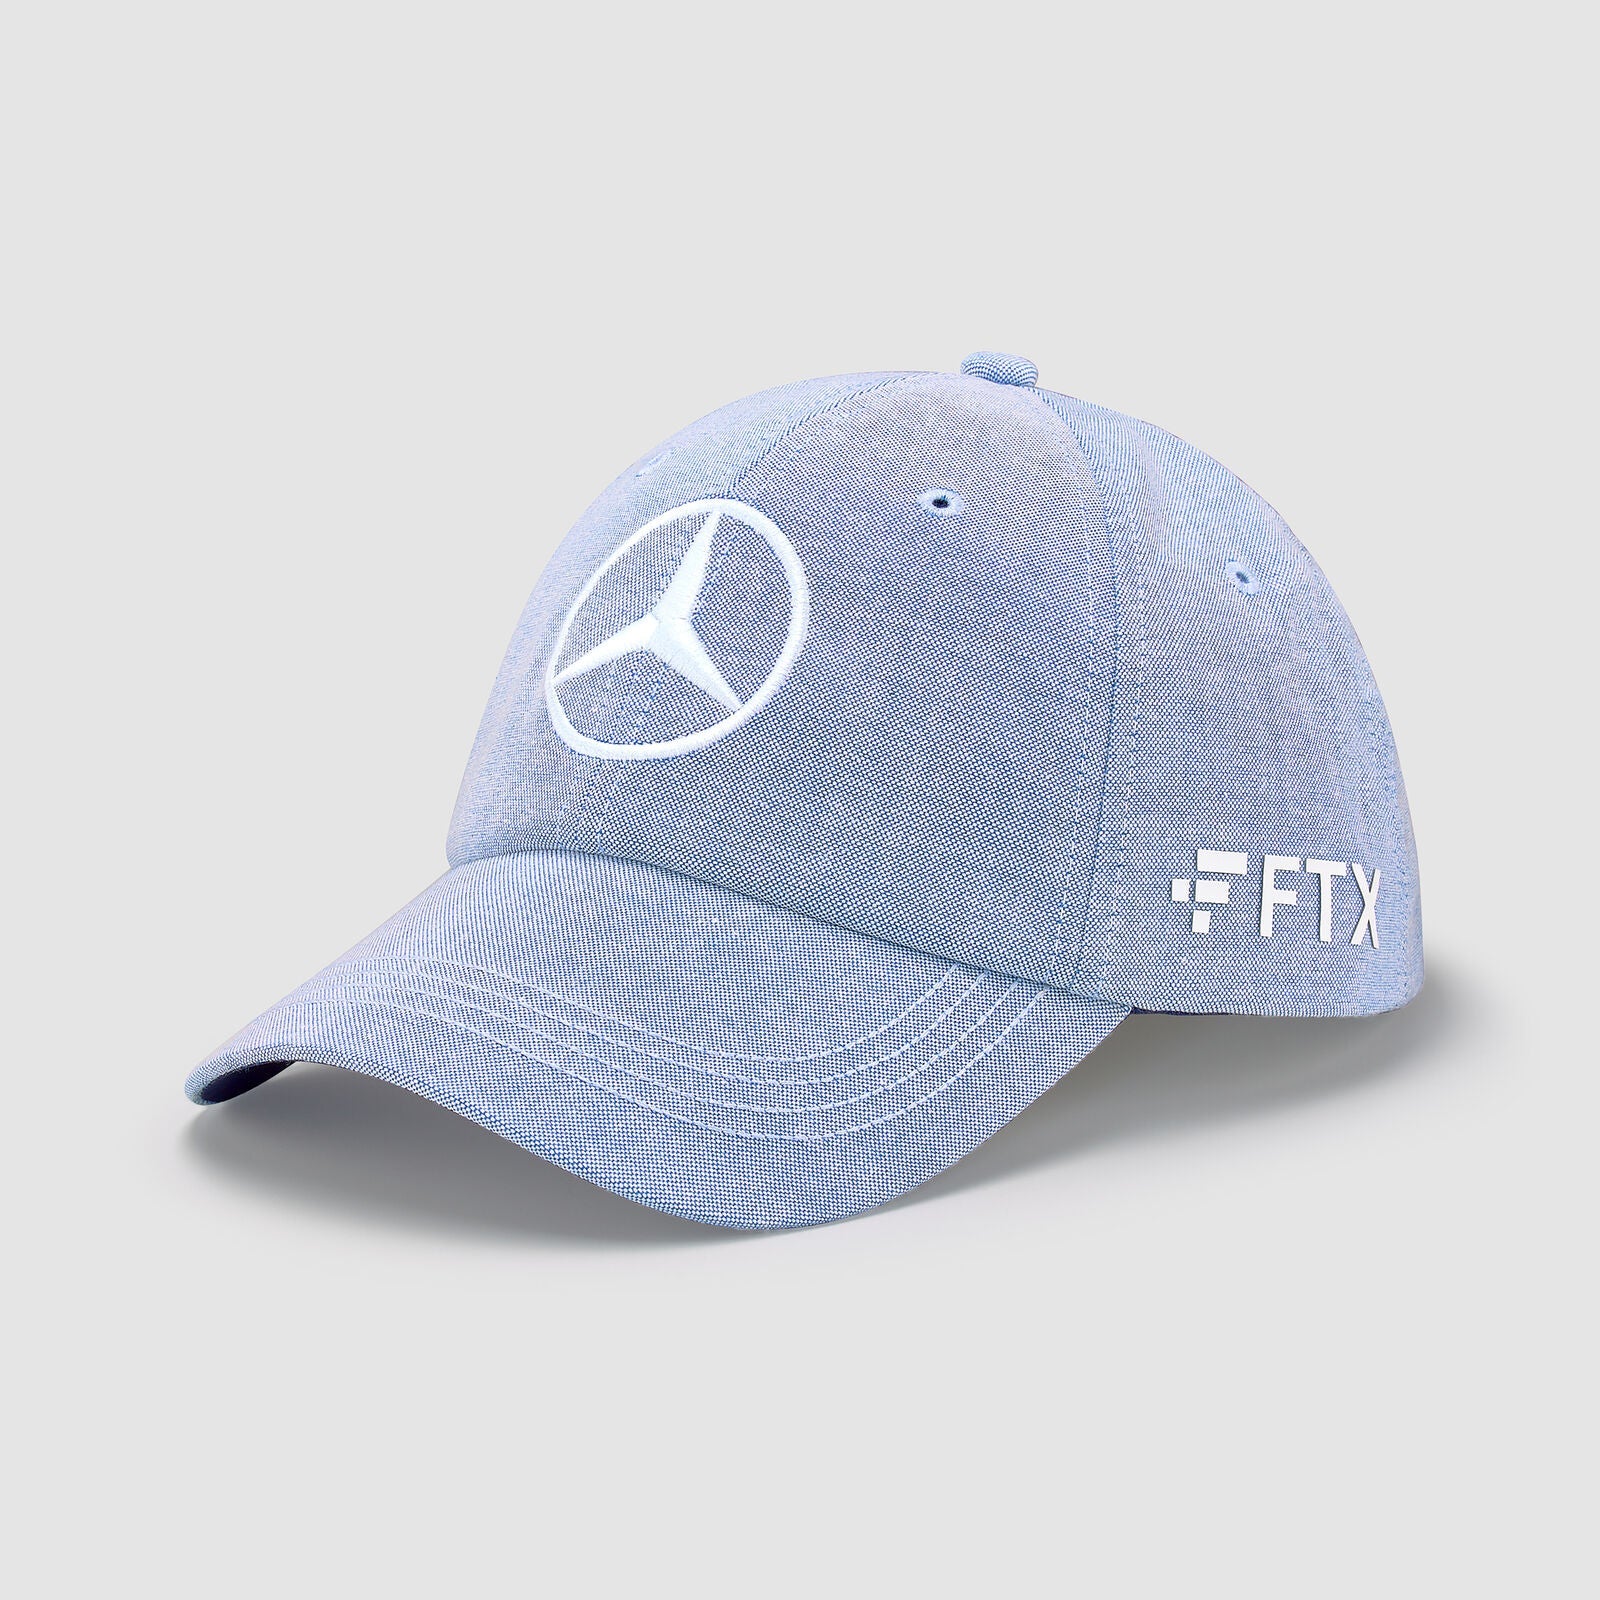 Mercedes 2022 George Russel Special Edition Cap